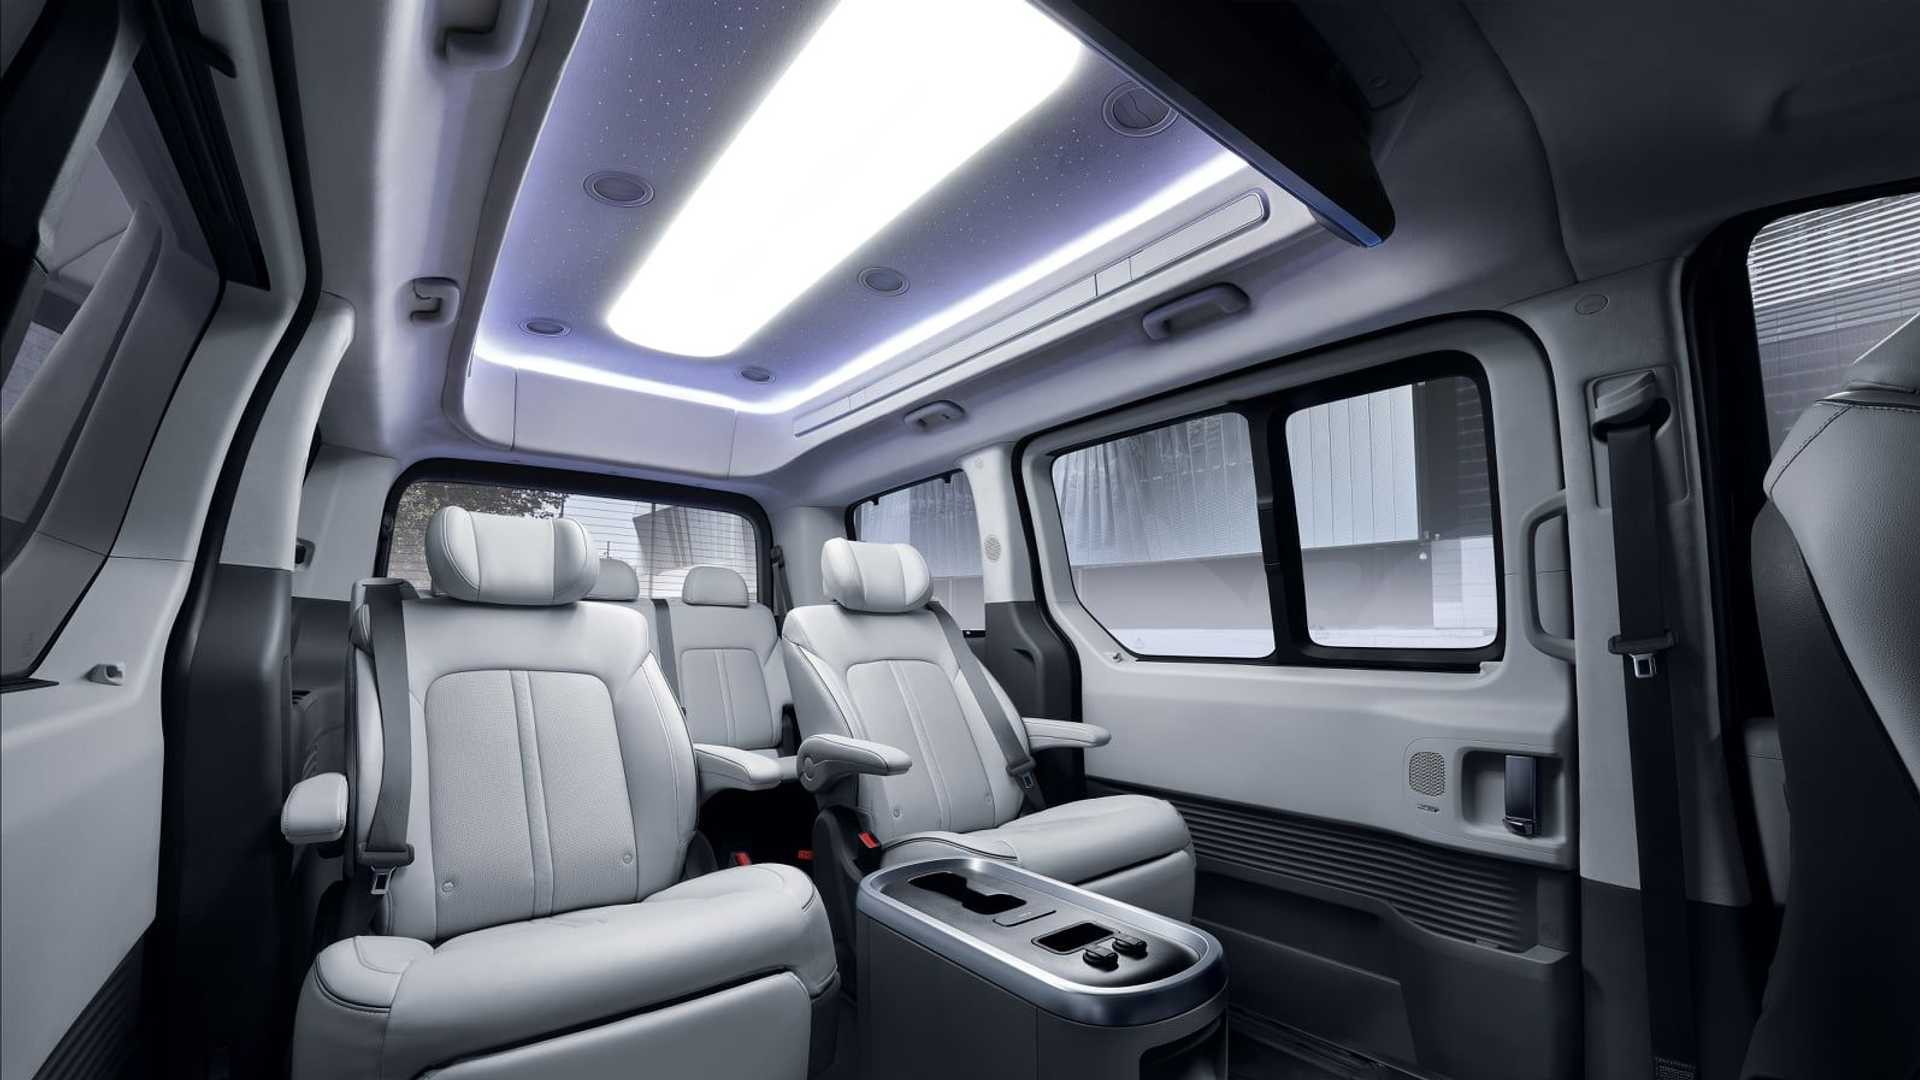 https://s1.cdn.autoevolution.com/images/news/watch-out-mercedes-the-hyundai-staria-limousine-wants-to-redefine-luxury-shuttles-186965_1.jpg